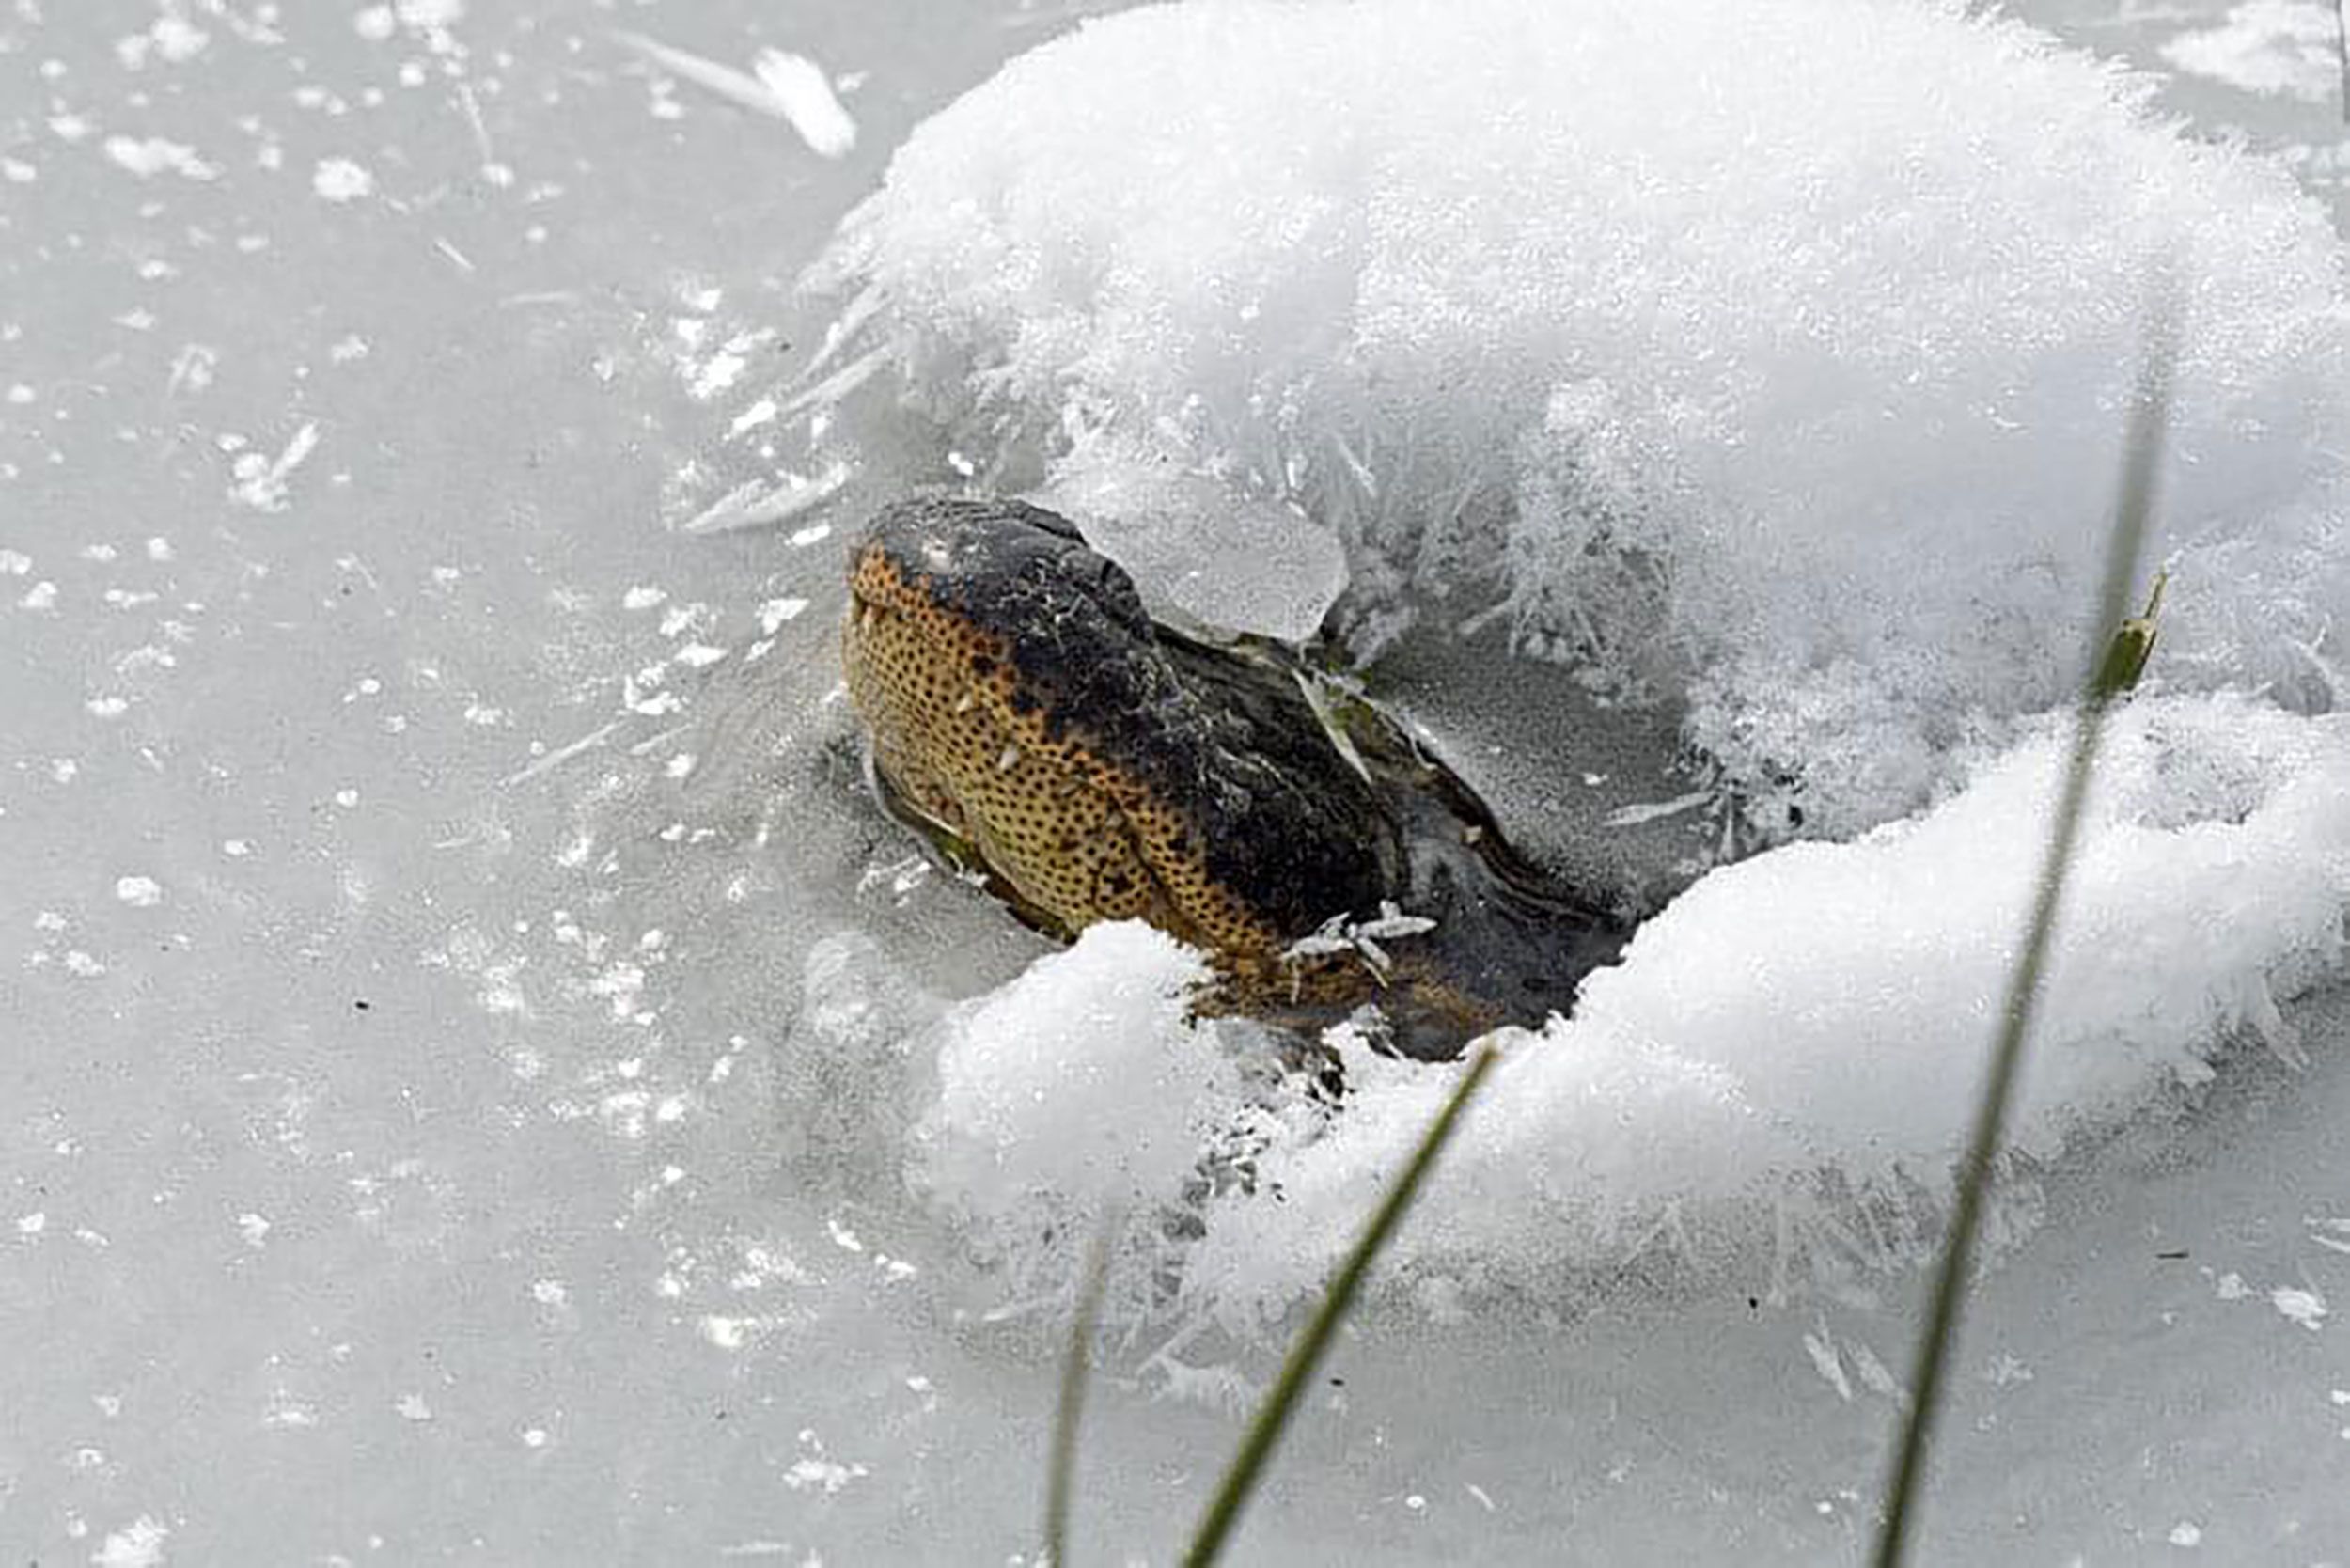 Alligators stick their snouts above freezing waters to breathe | CNN